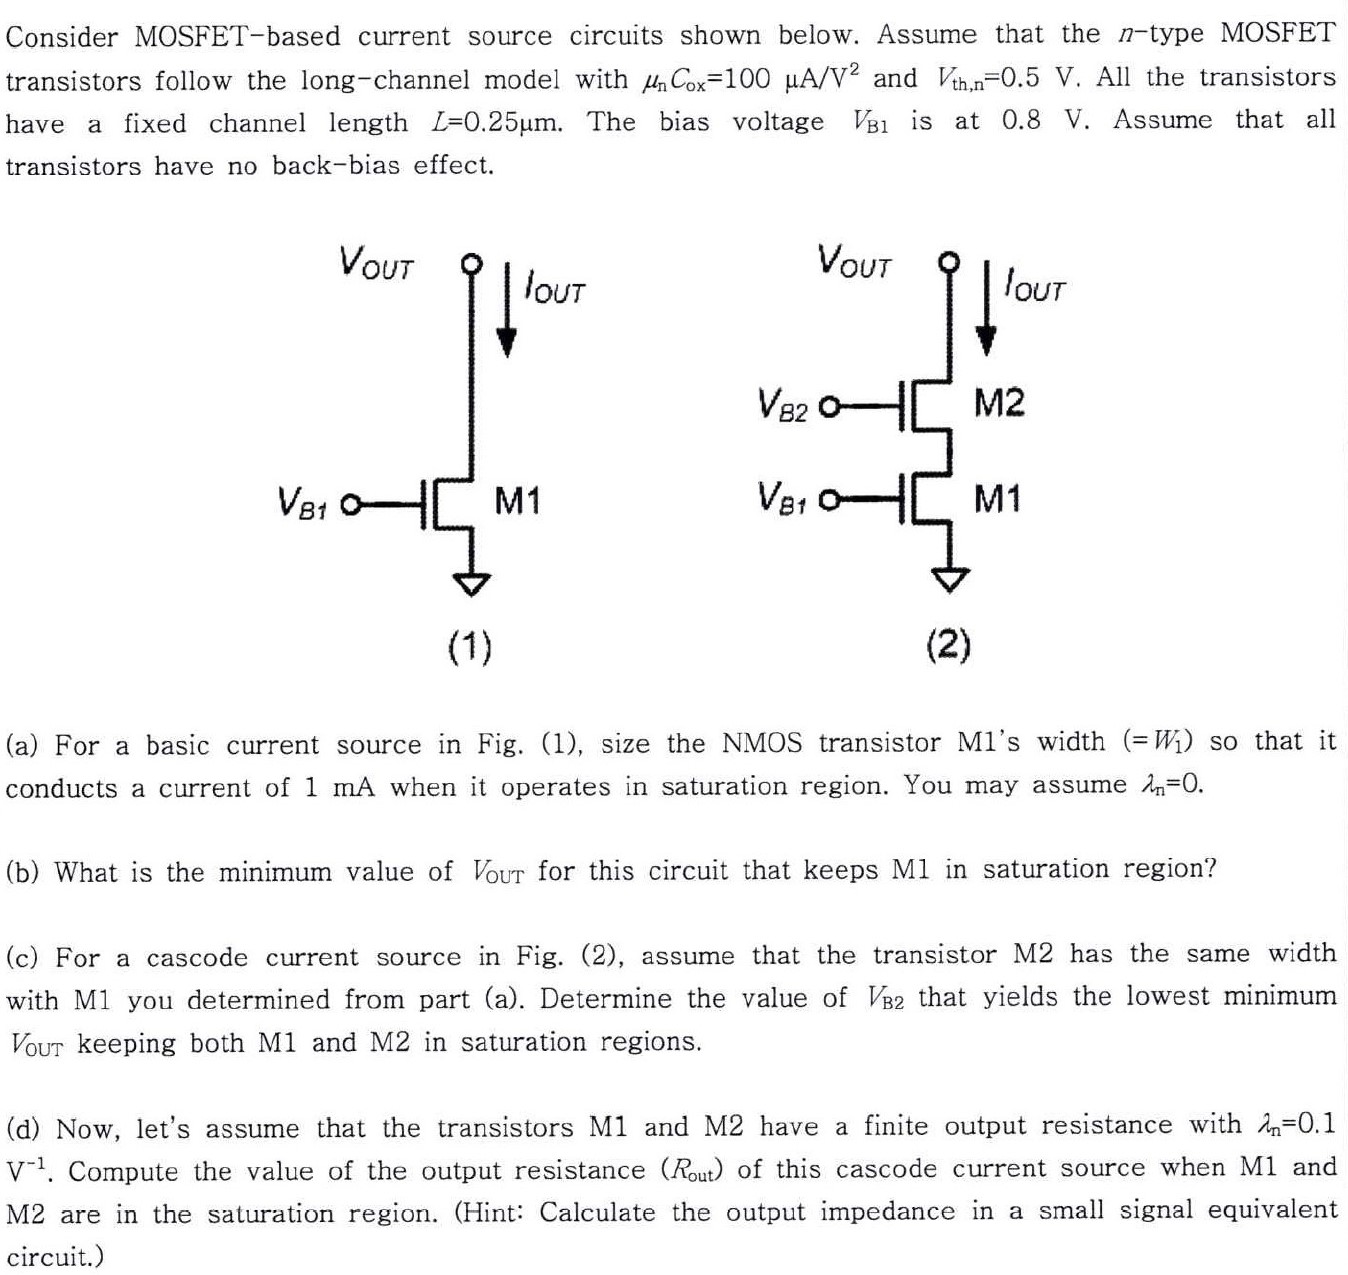 Consider MOSFET-based current source circuits shown below. Assume that the n-type MOSFET transistors follow the long-channel model with μnCox = 100 μA/V2 and Vth,n = 0.5 V. All the transistors have a fixed channel length L = 0.25 μm. The bias voltage VB1 is at 0.8 V. Assume that all transistors have no back-bias effect. (1) (2) (a) For a basic current source in Fig. (1), size the NMOS transistor M1's width ( = W1) so that it conducts a current of 1 mA when it operates in saturation region. You may assume λn = 0. (b) What is the minimum value of Vout for this circuit that keeps M1 in saturation region? (c) For a cascode current source in Fig. (2), assume that the transistor M2 has the same width with M1 you determined from part (a). Determine the value of VB2 that yields the lowest minimum VOUT keeping both M1 and M2 in saturation regions. (d) Now, let's assume that the transistors M1 and M2 have a finite output resistance with λn = 0.1 V−1. Compute the value of the output resistance (Rout) of this cascode current source when M1 and M2 are in the saturation region. (Hint: Calculate the output impedance in a small signal equivalent circuit.)